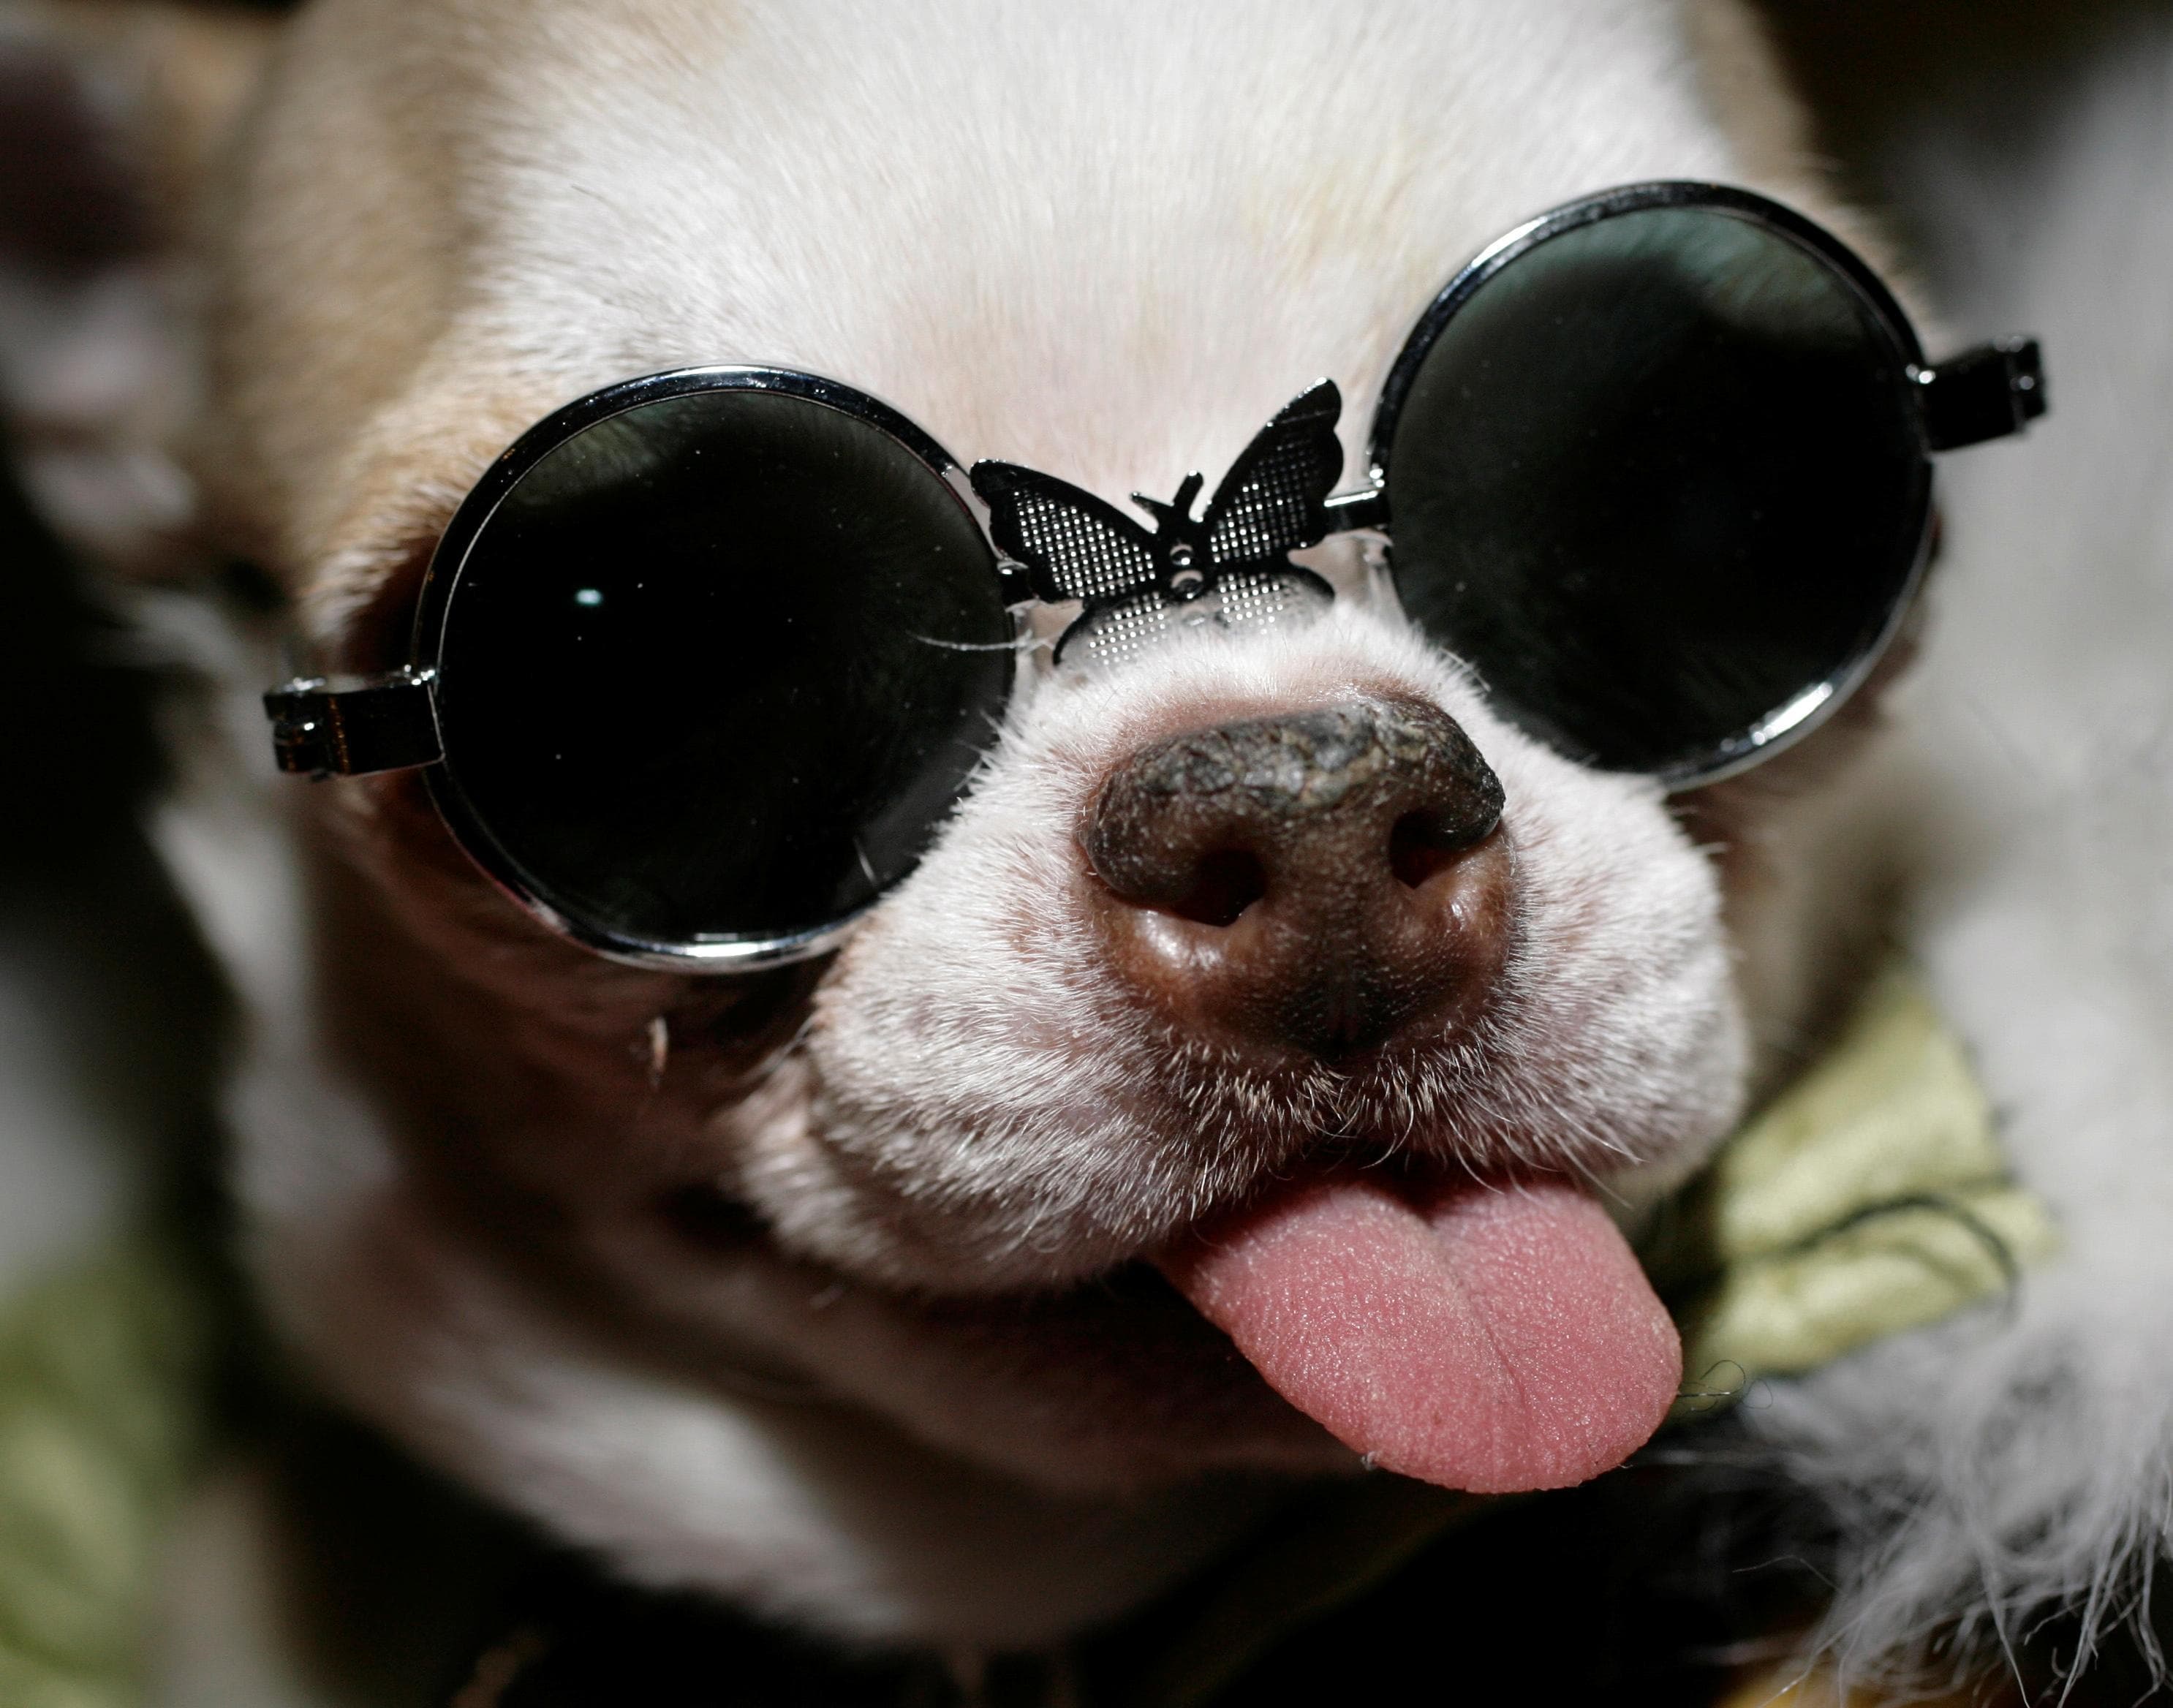 A chihuahua named Tequila the day before the Westminster dog show in New York, Sunday, Feb. 10, 2008. (AP Photo/Seth Wenig)